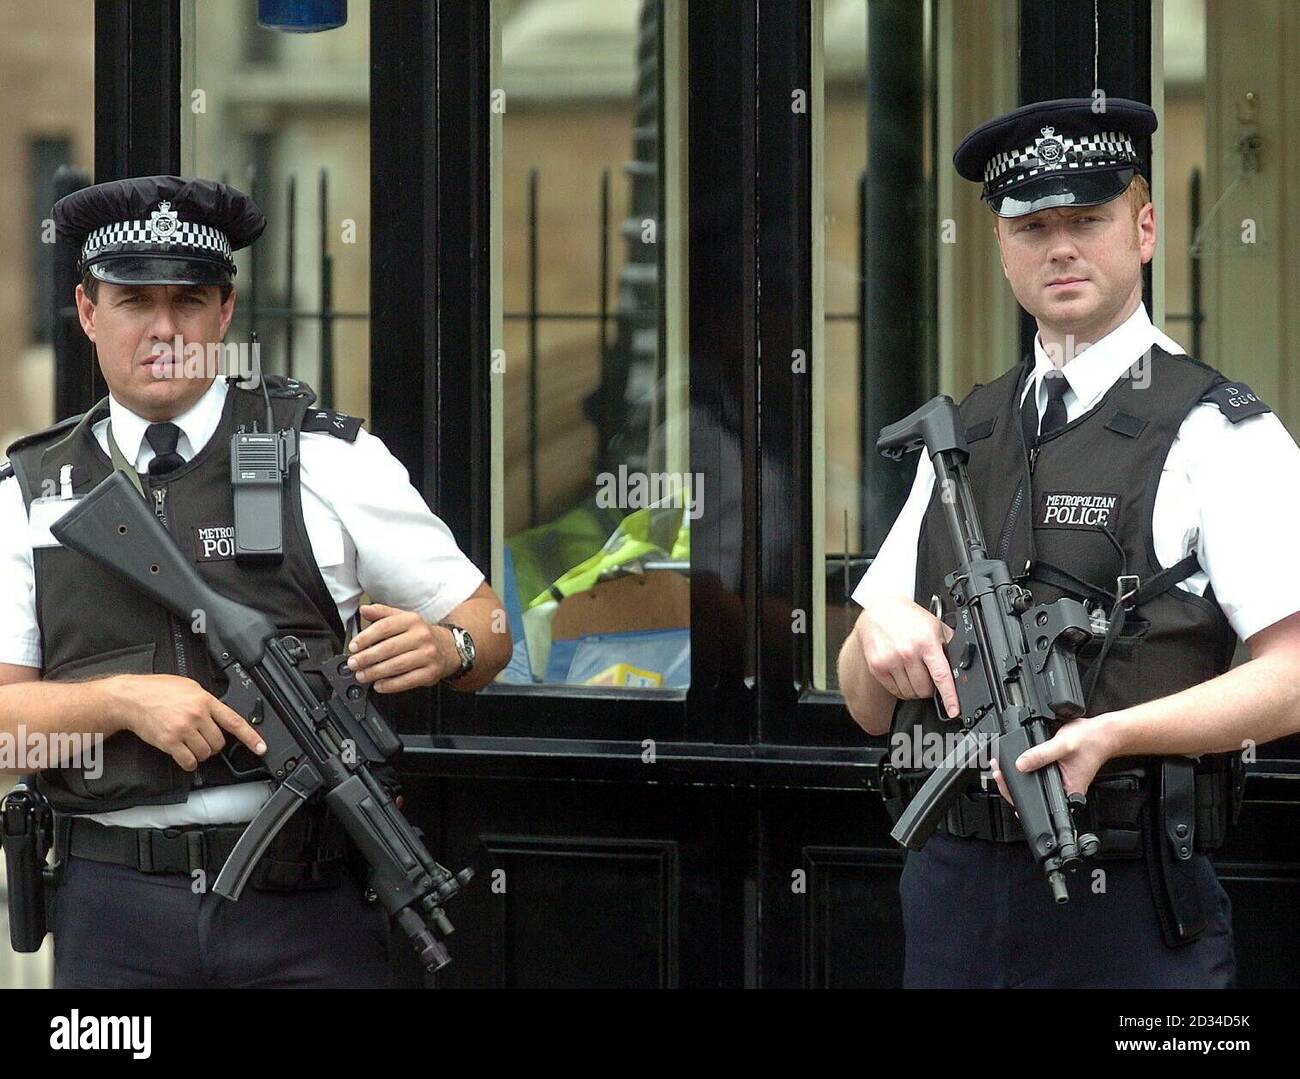 Armed Police officers in Westminster. Britain's most senior police officer today defended the specialist firearms officers who who shot dead an innocent Brazilian man they had mistaken for a suicide bomber. Metropolitan Police Commissioner Sir Ian Blair said the officers who shot Jean Charles de Menezes at Stockwell Tube station last week would have thought they faced the risk of 'certain death'. They 'clearly thought' they were dealing with a suicide bomber, and yet they still ran towards him, he said. Stock Photo